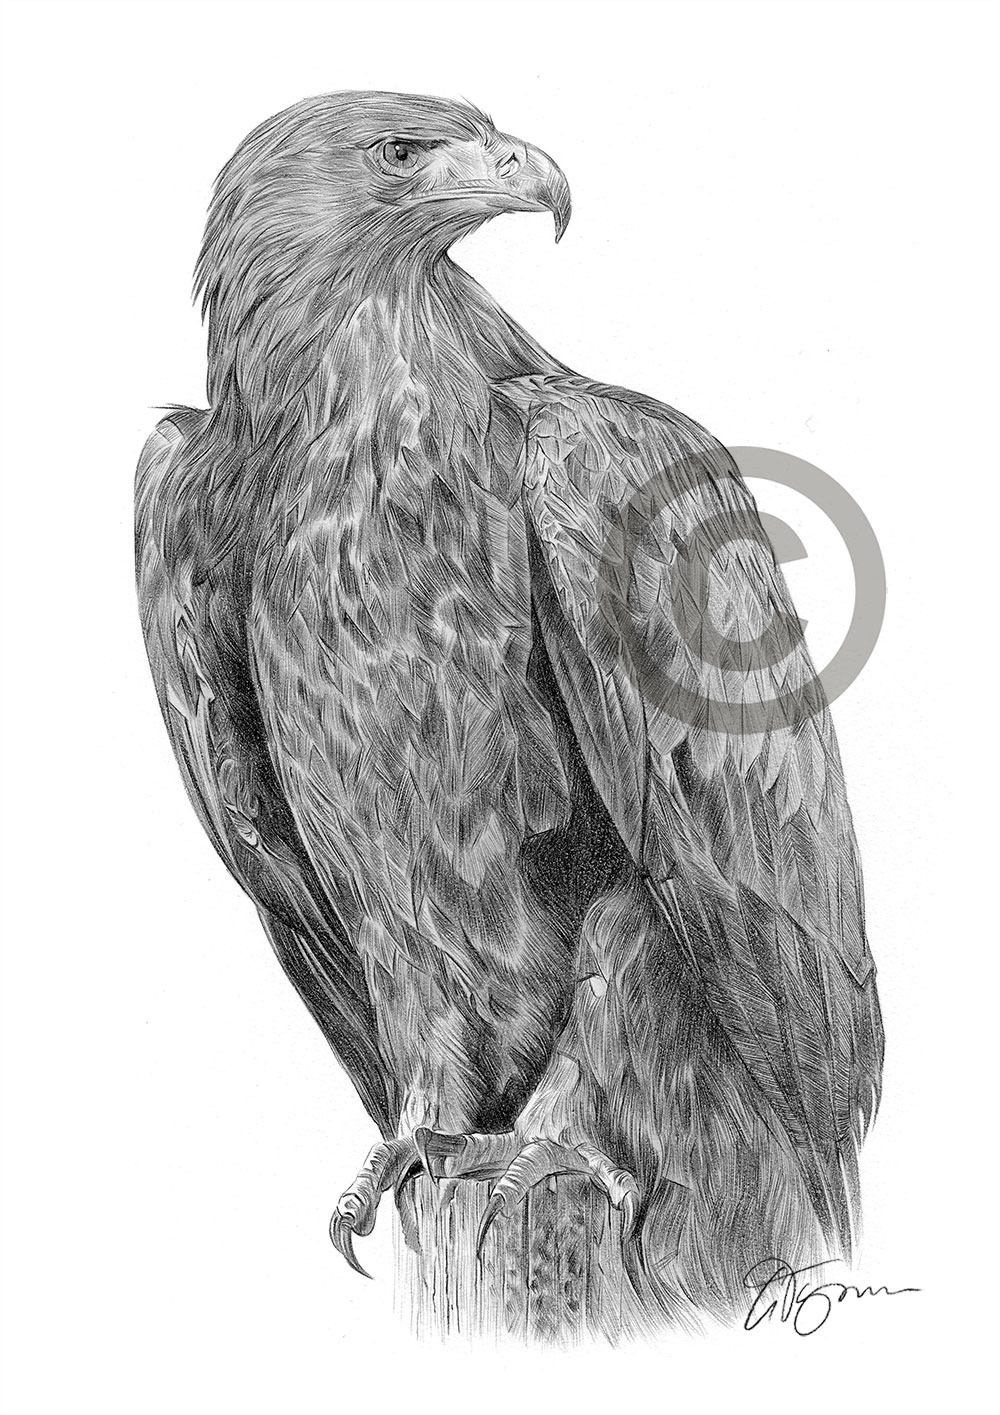 Pencil drawing of a golden eagle by UK artist Gary Tymon